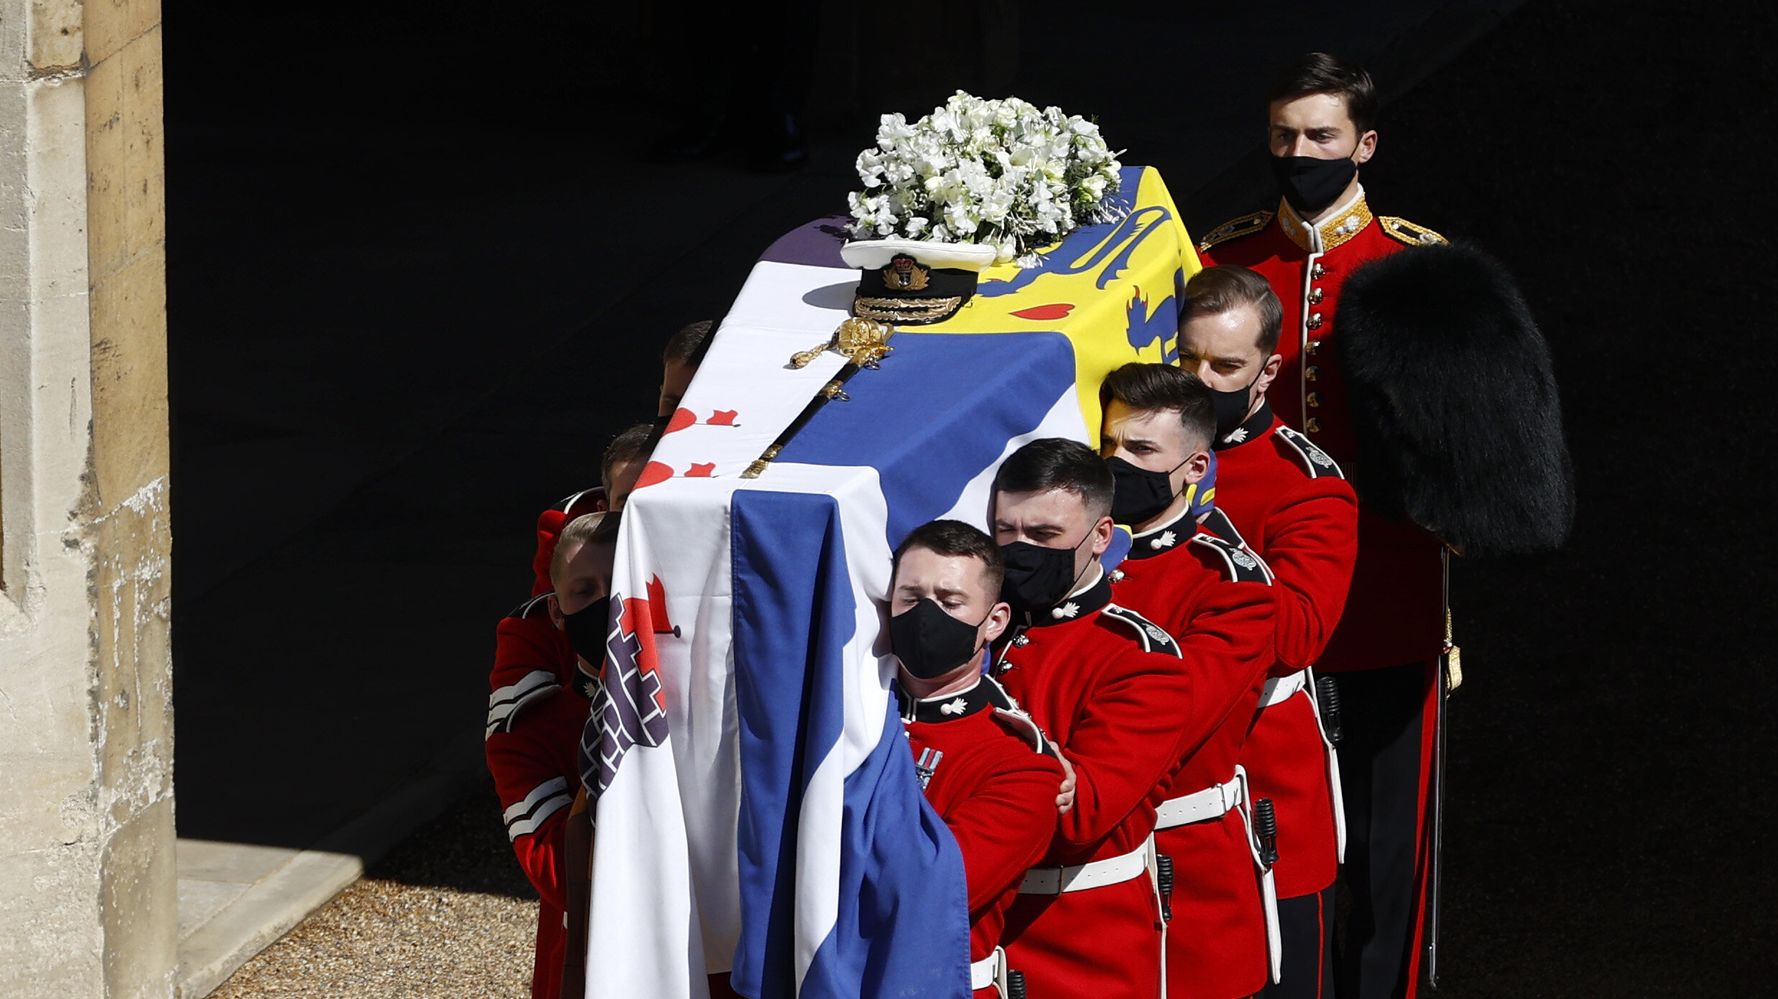 Prince Philip's Funeral Had 'Eerie' Moments, Royal Family Member Says